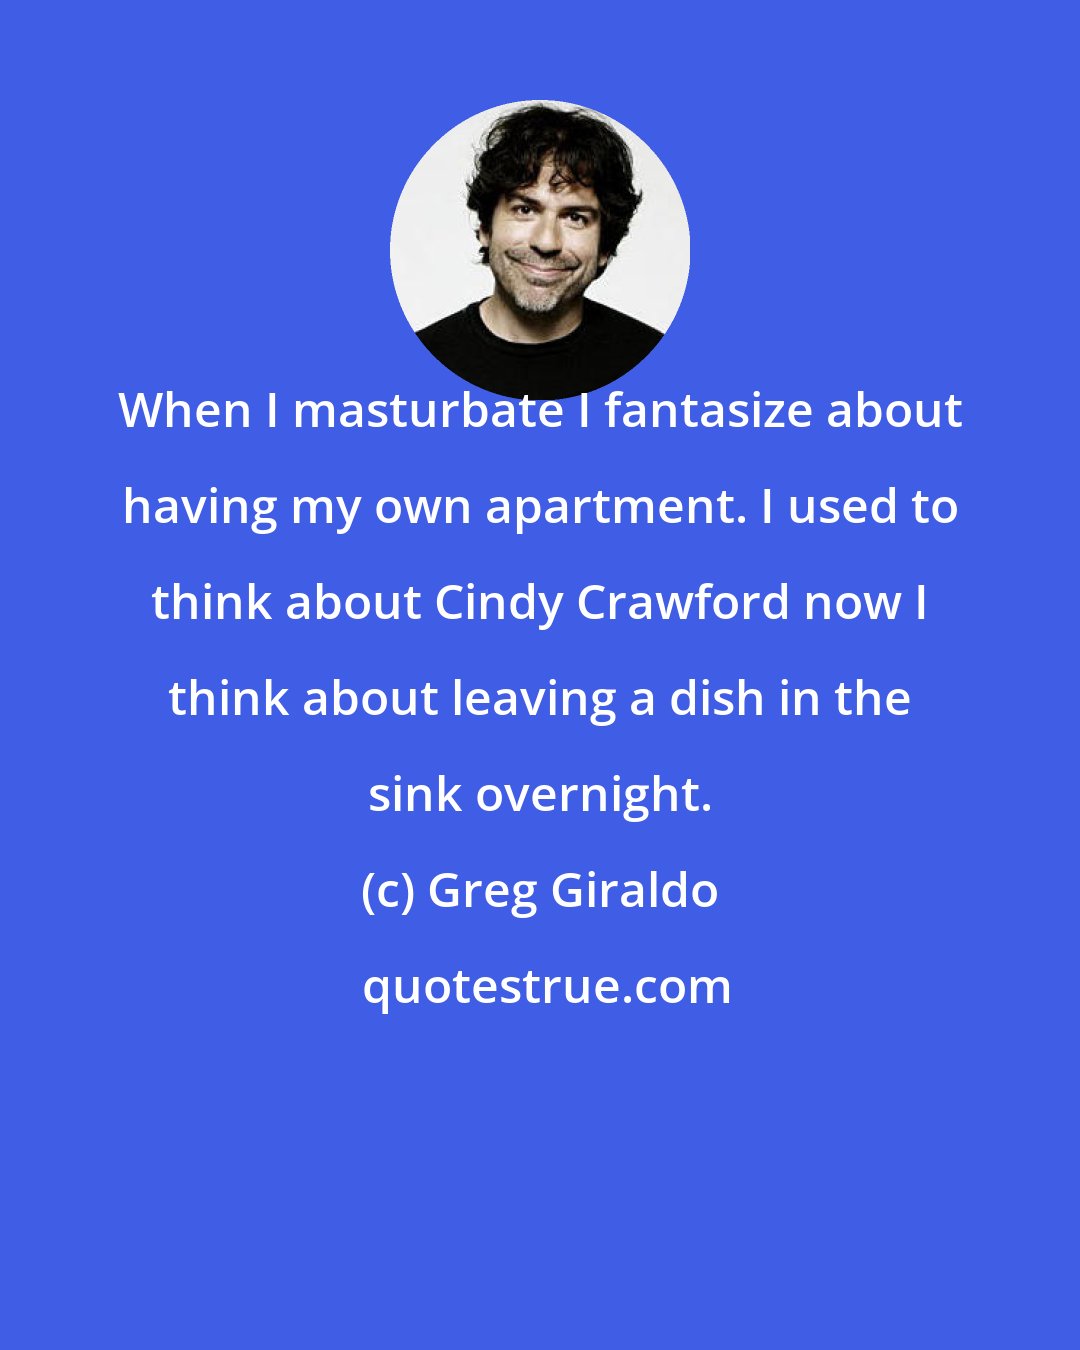 Greg Giraldo: When I masturbate I fantasize about having my own apartment. I used to think about Cindy Crawford now I think about leaving a dish in the sink overnight.